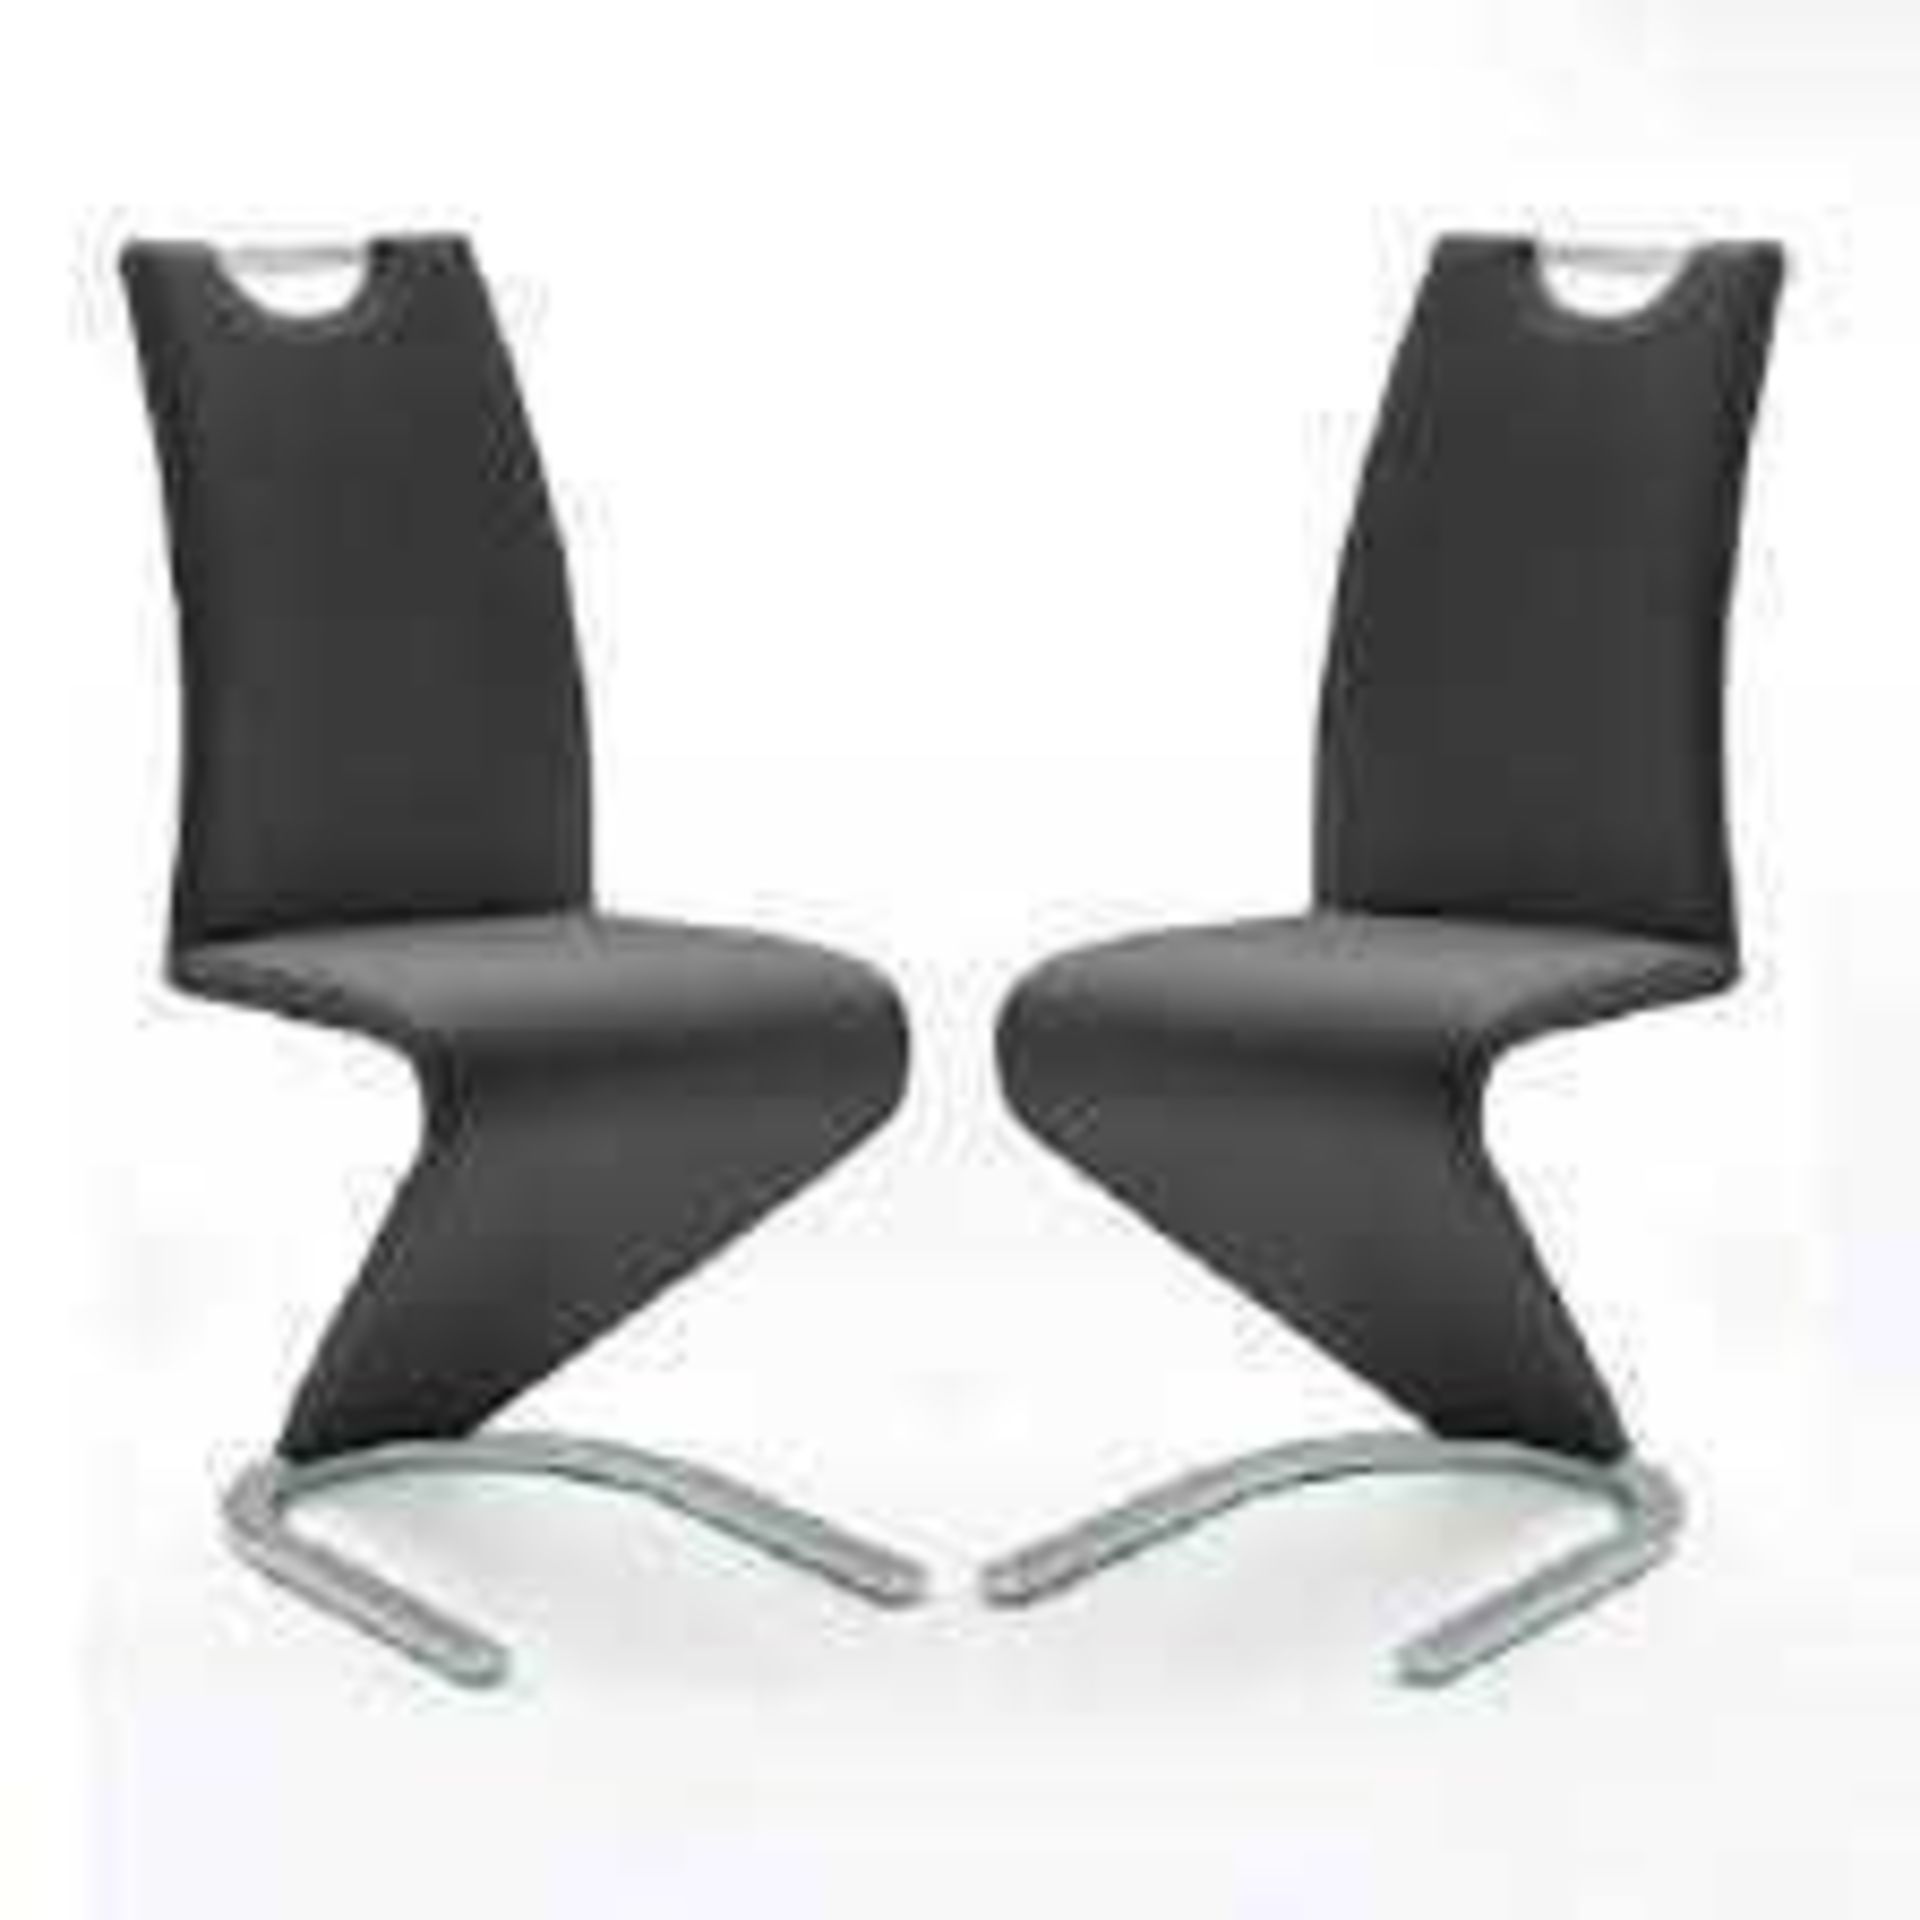 £135 Boxed Amado Z Black Faux Leather Dining Chair